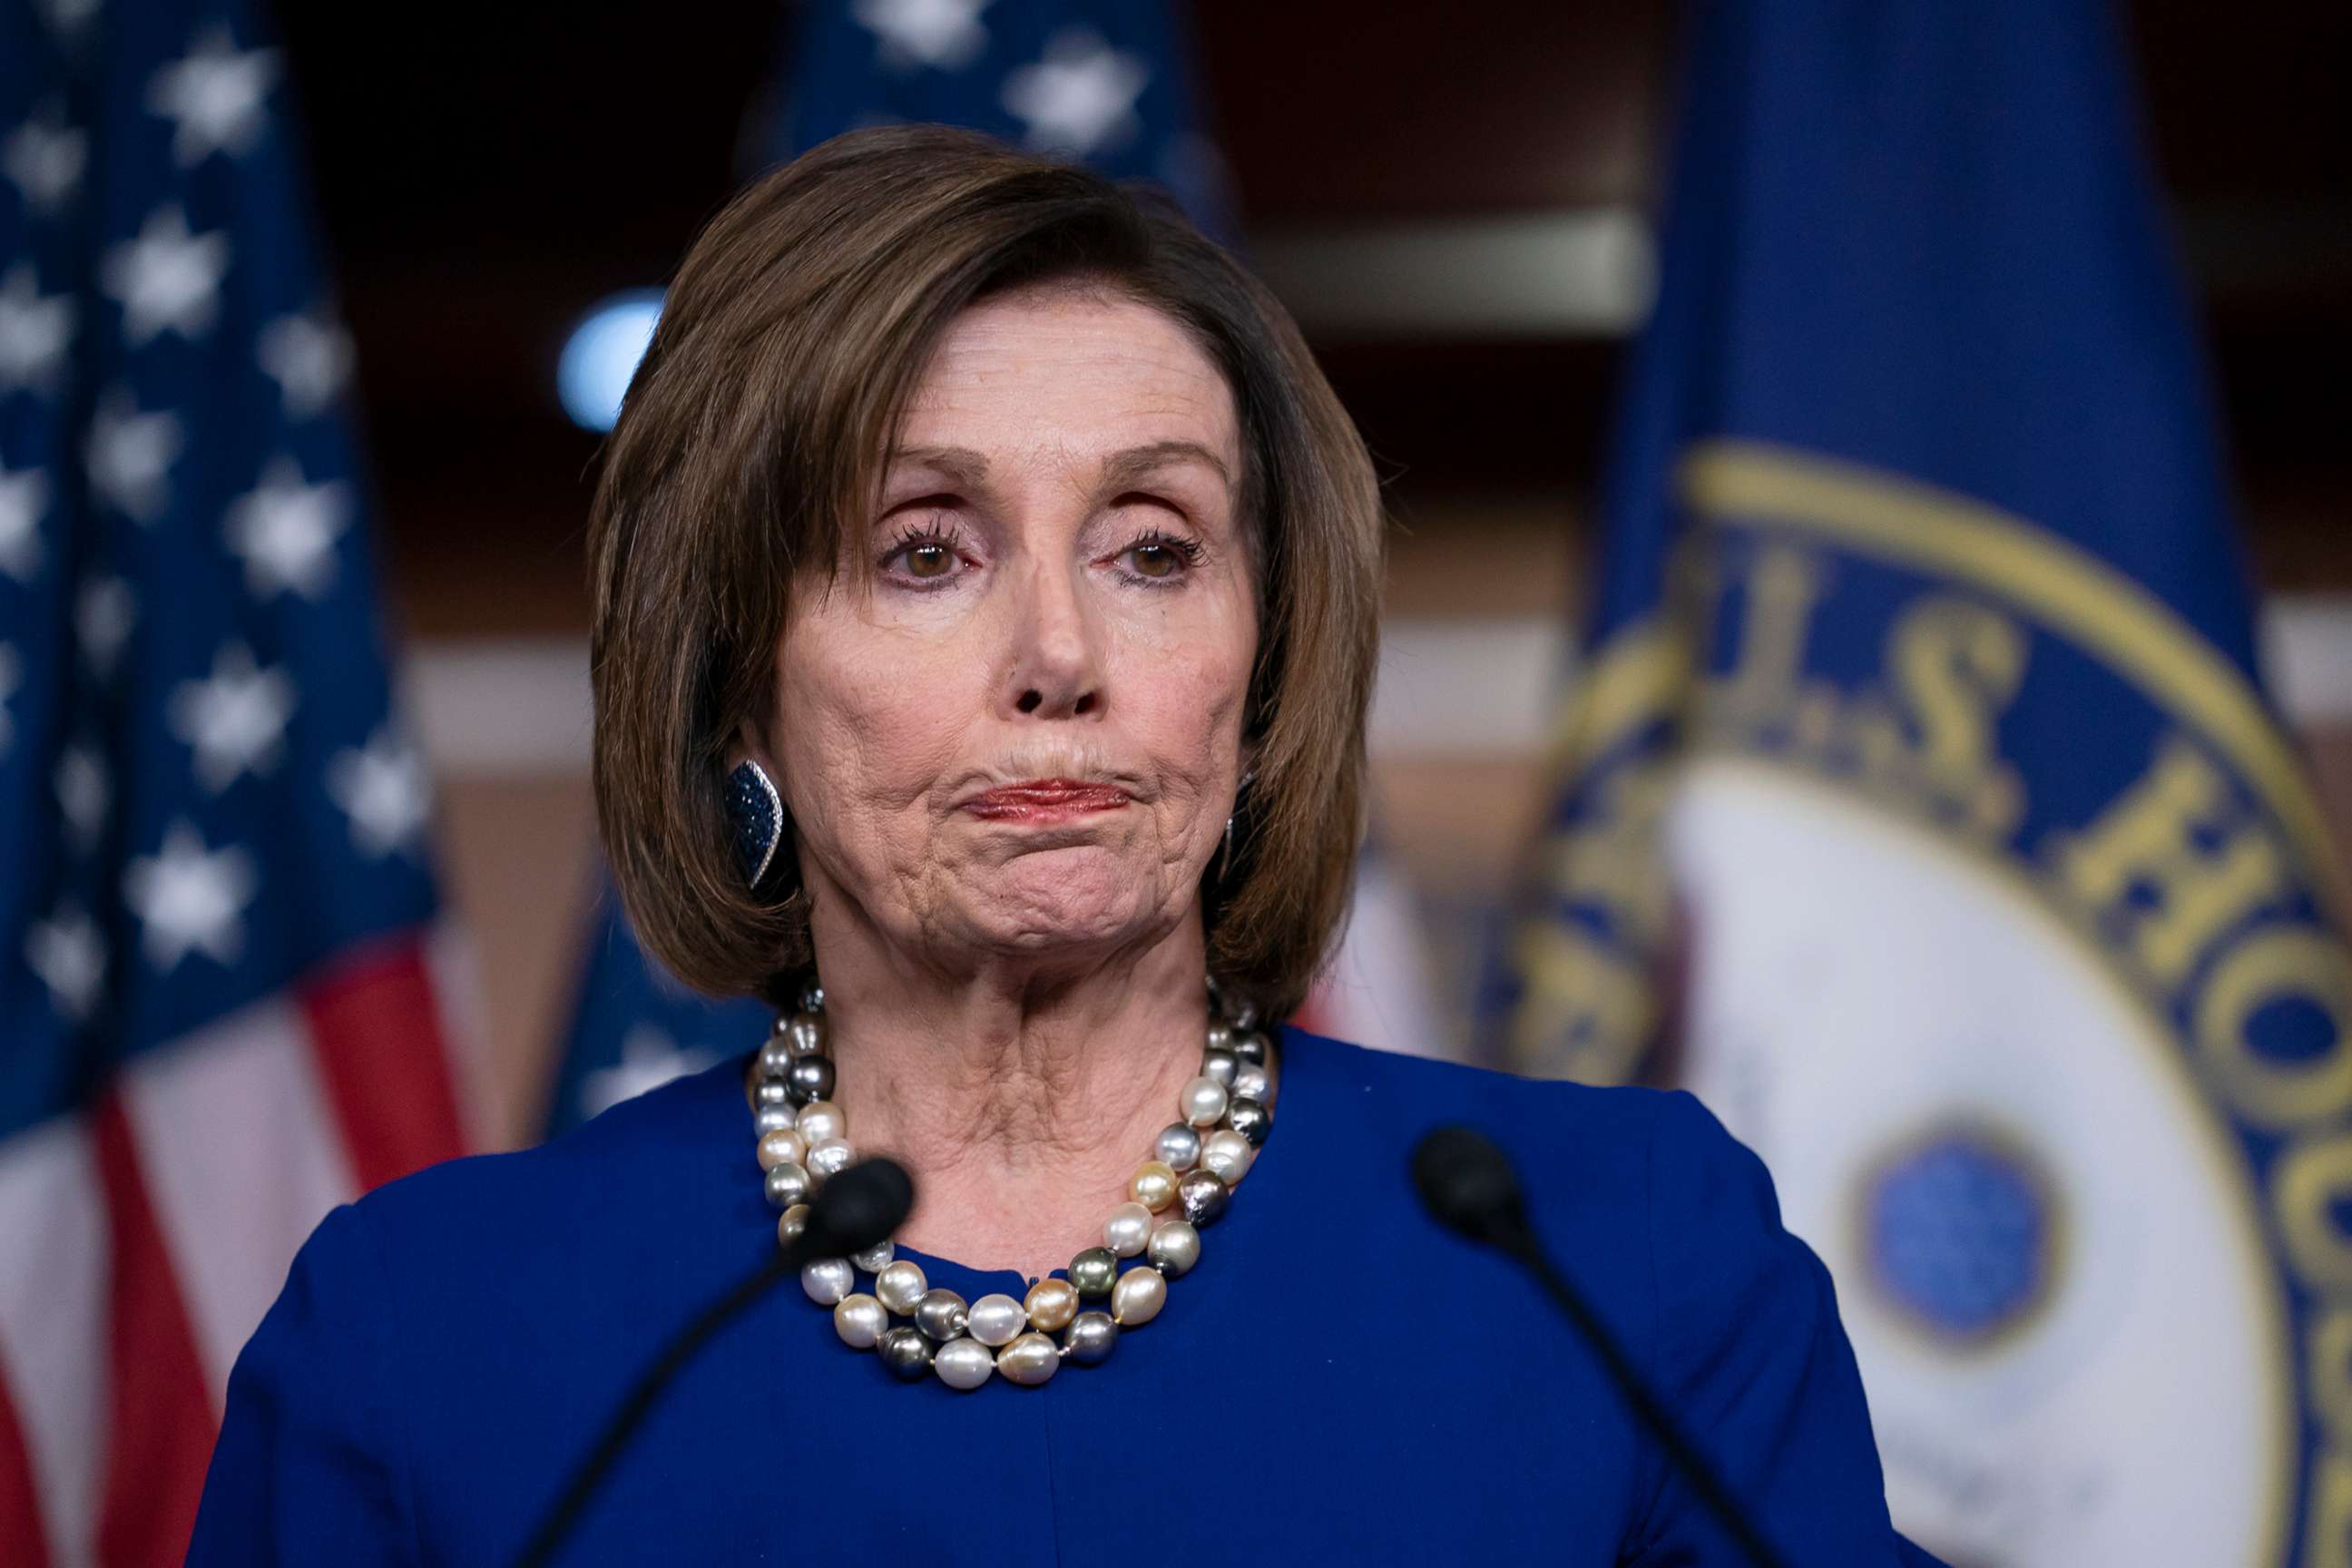 PHOTO: Speaker of the House Nancy Pelosi holds a news conference the morning after the impeachment of President Donald Trump ended in acquittal, at the Capitol in Washington, D.C., Feb. 6, 2020.